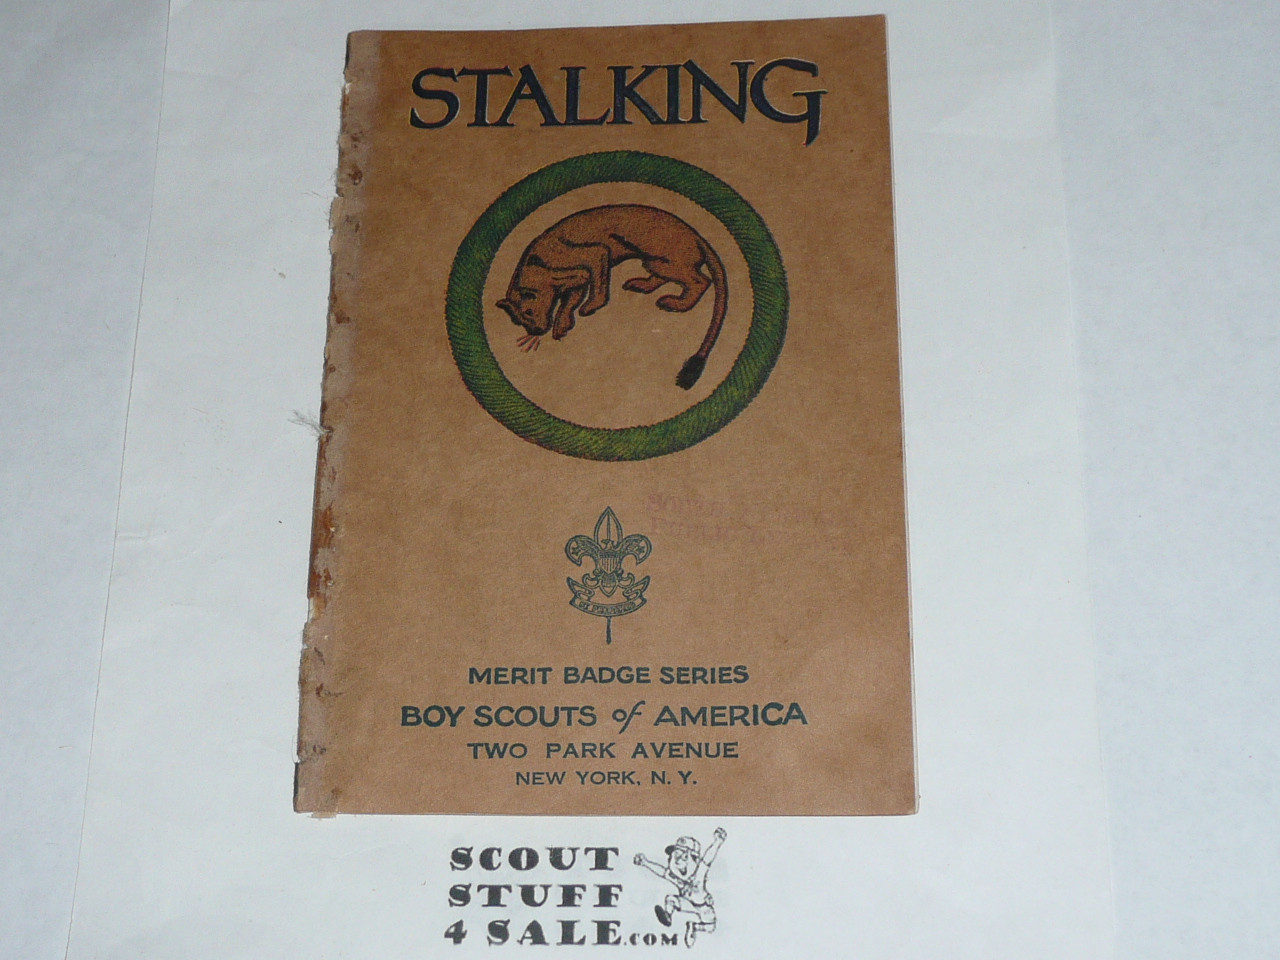 Stalking Merit Badge Pamphlet, Type 3, Tan Cover, 2-40 Printing, some spine wear from library binding but book is solid